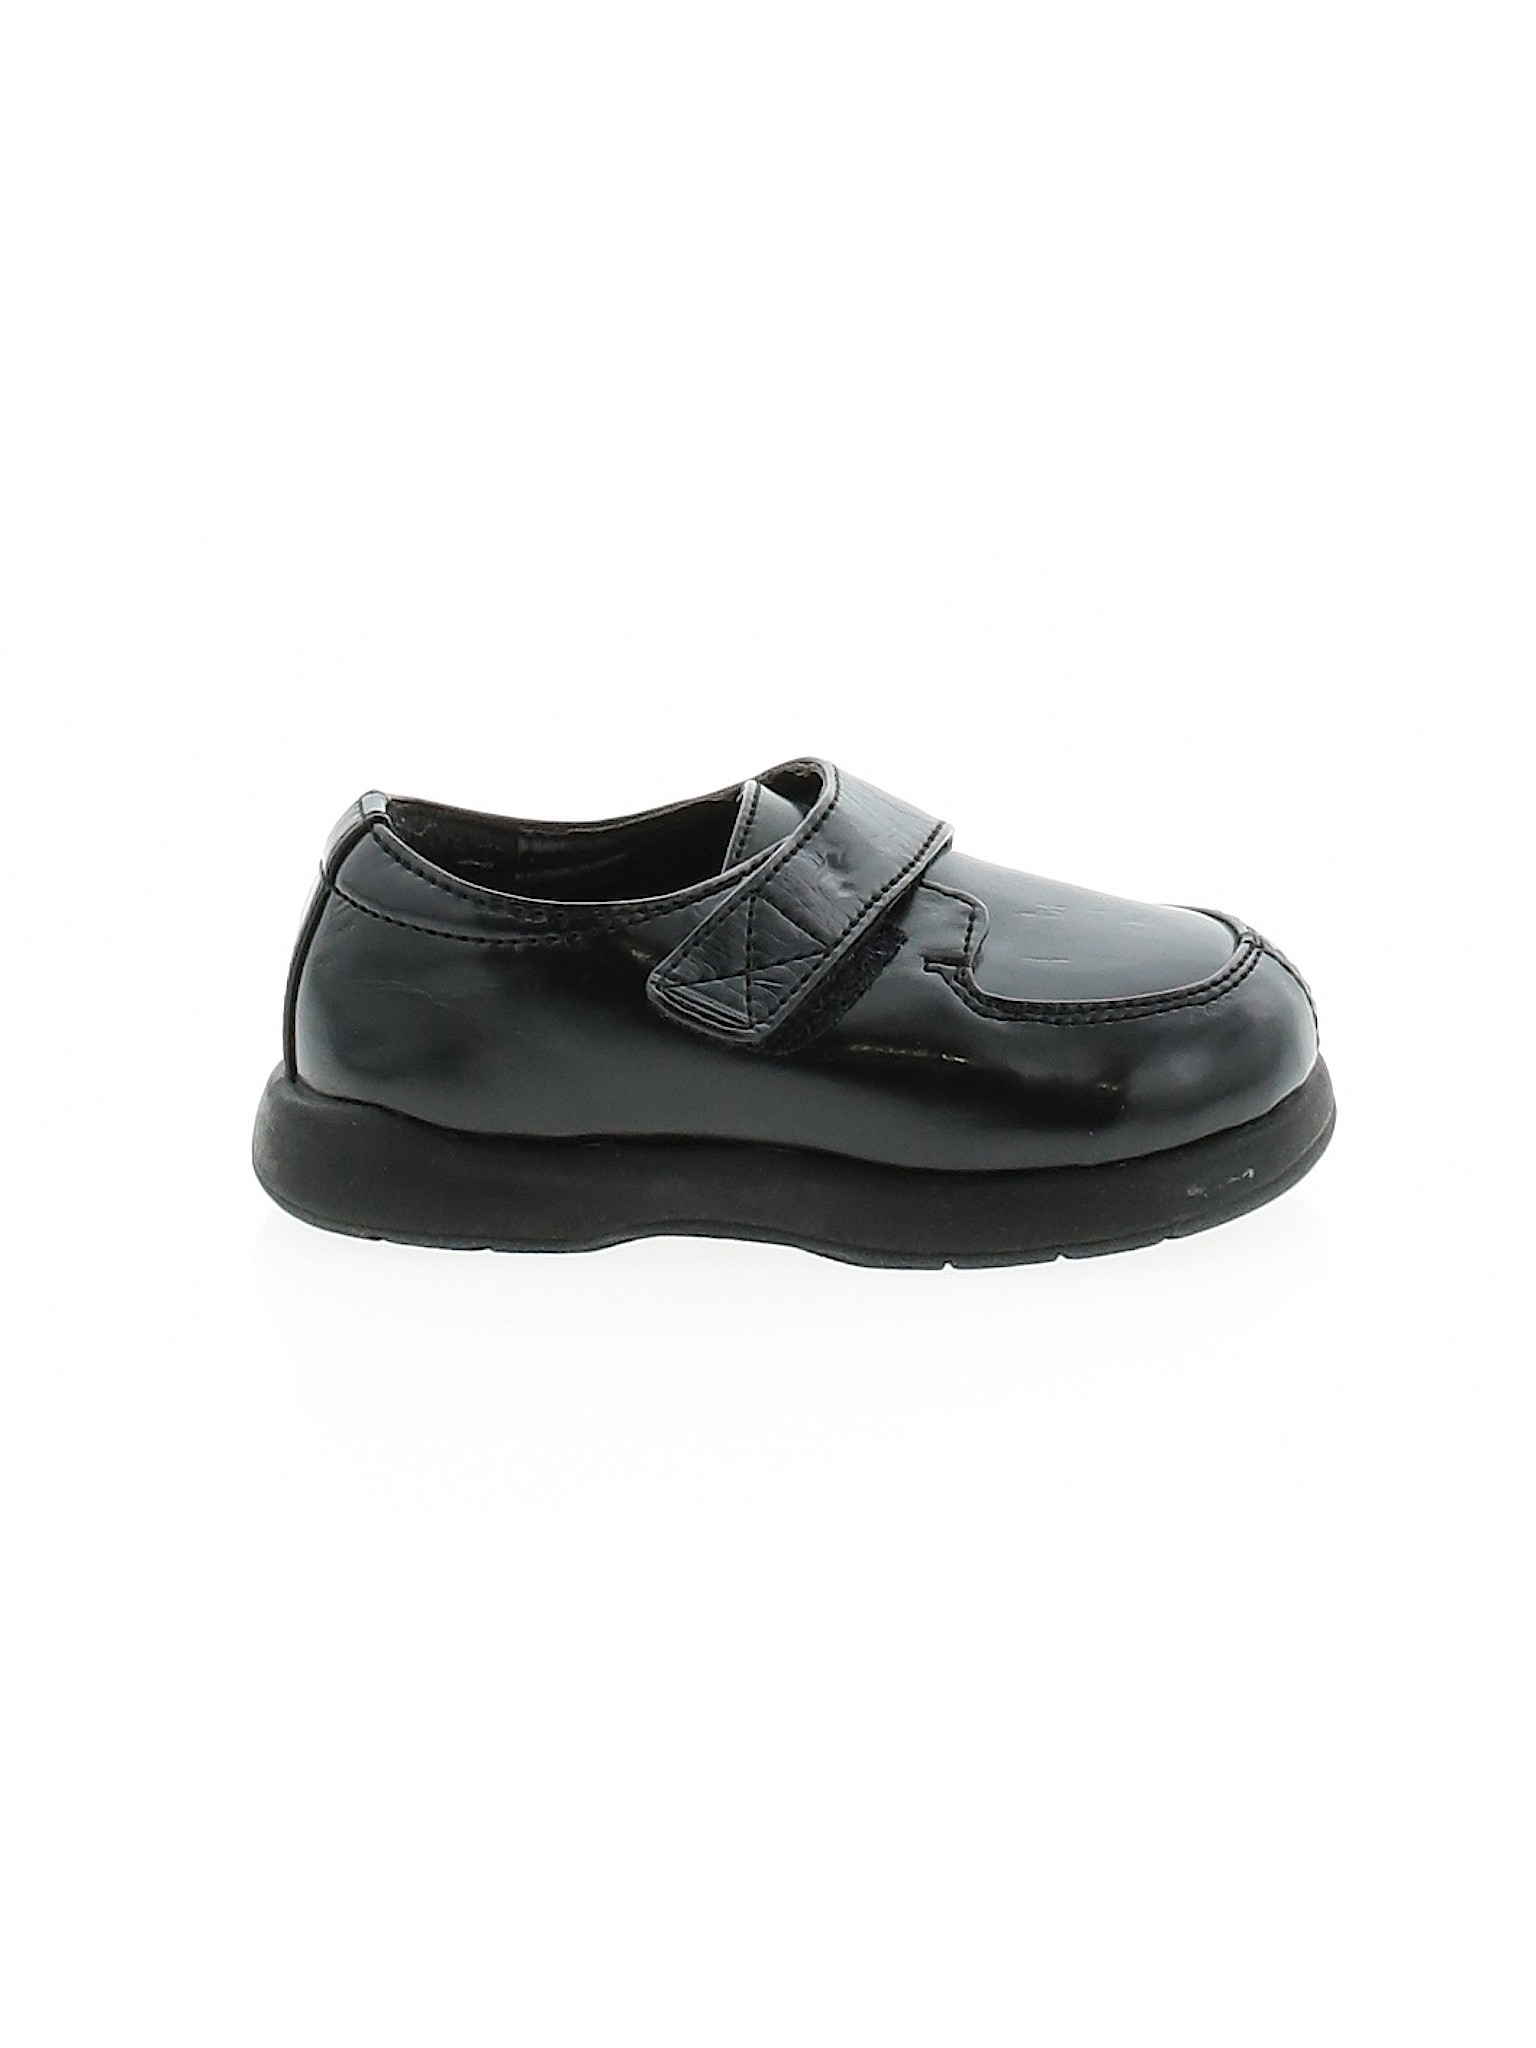 toddler boy casual dress shoes